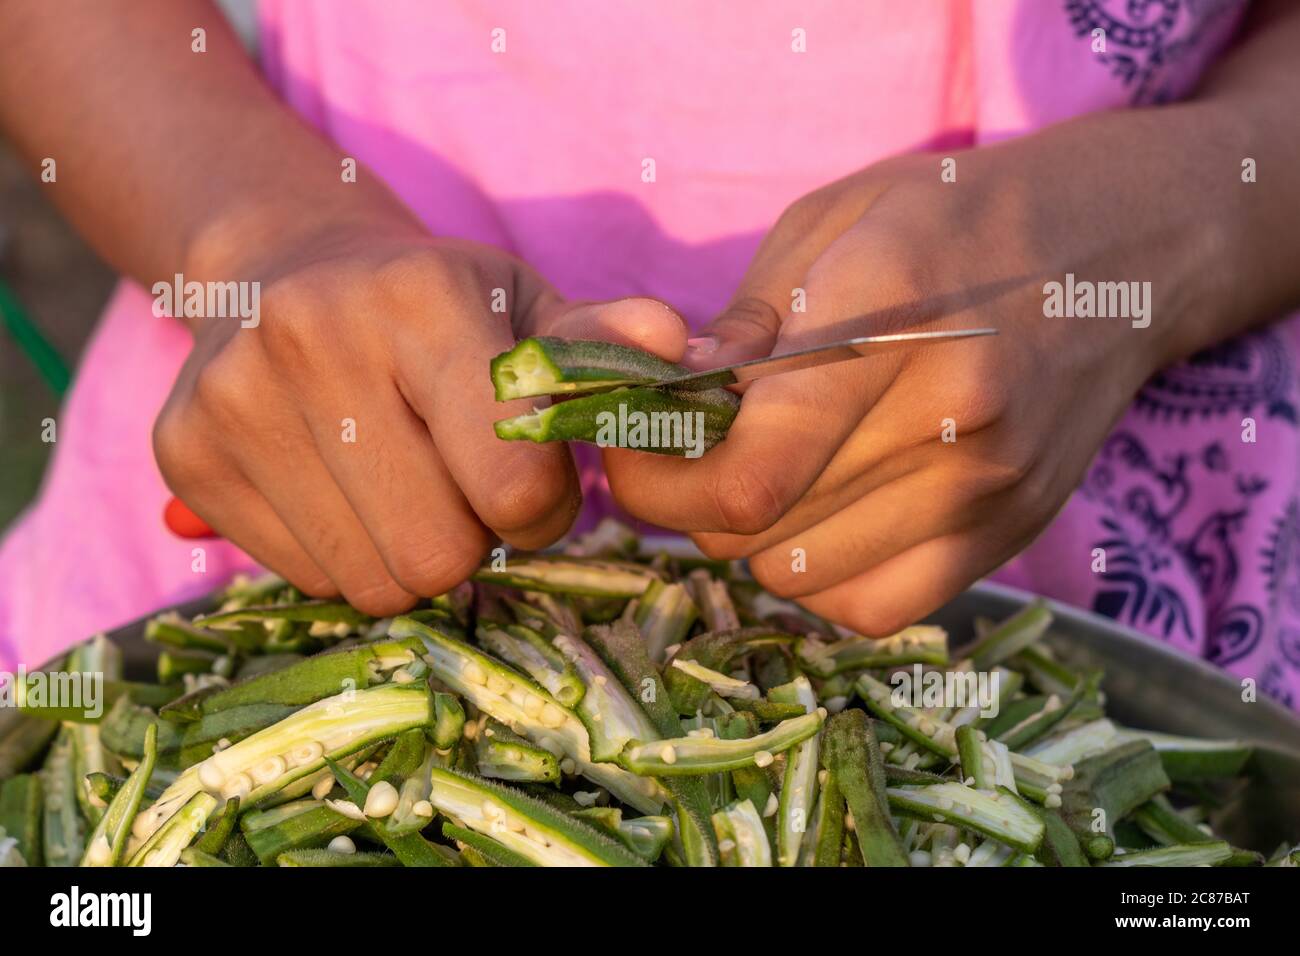 Young girl cutting okra lady finger with knife, preparing bhindi for cooking Stock Photo